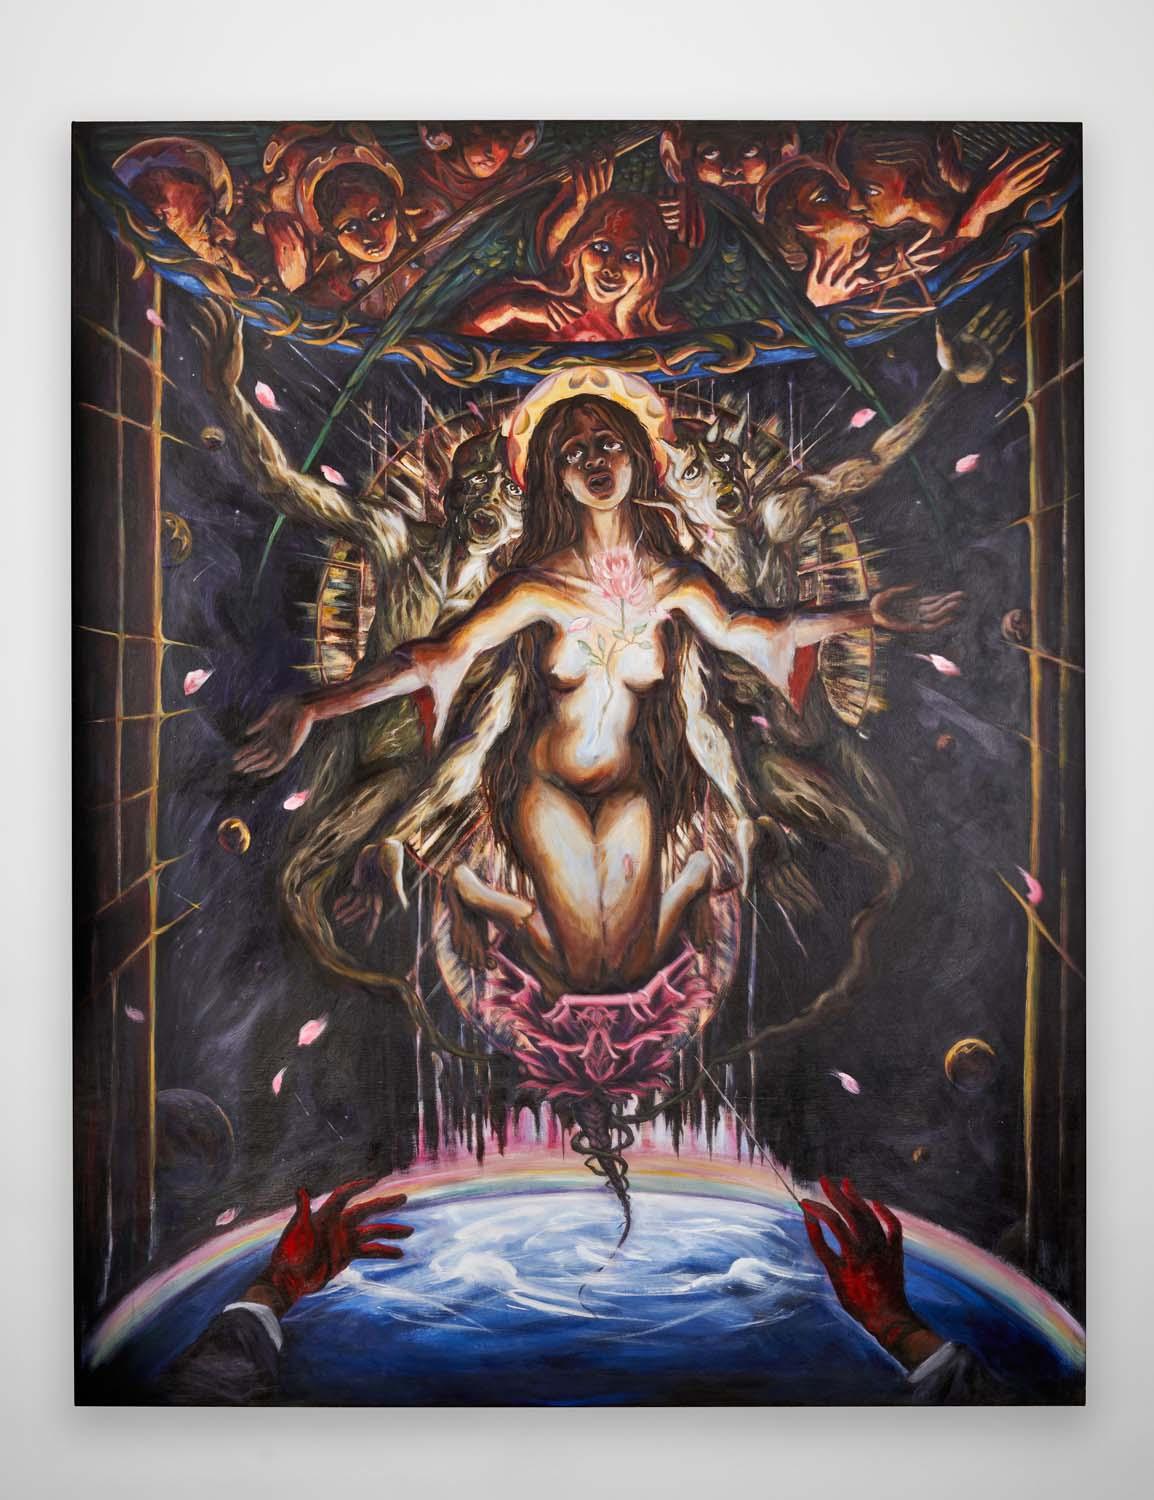 A painting of a central female figure appearing to be illuminated from within, casting a glow upon the array of angels and demons depicted above her head